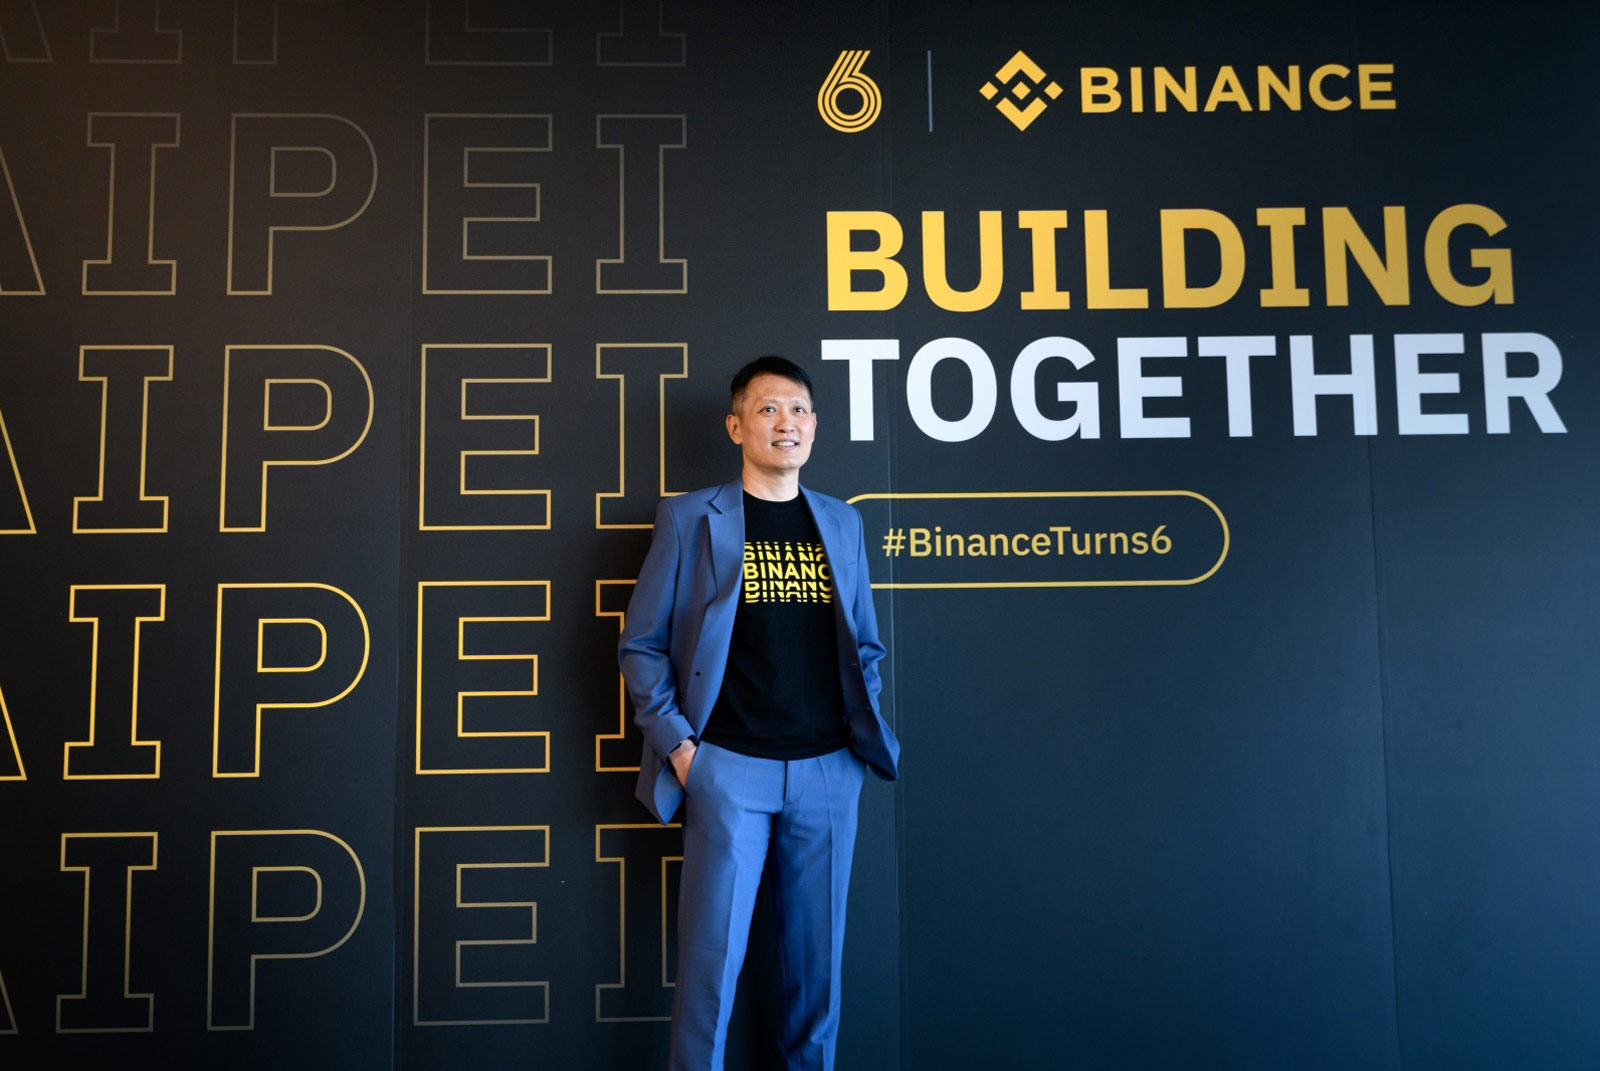 Binance celebrates its 6th anniversary, what’s their next move?